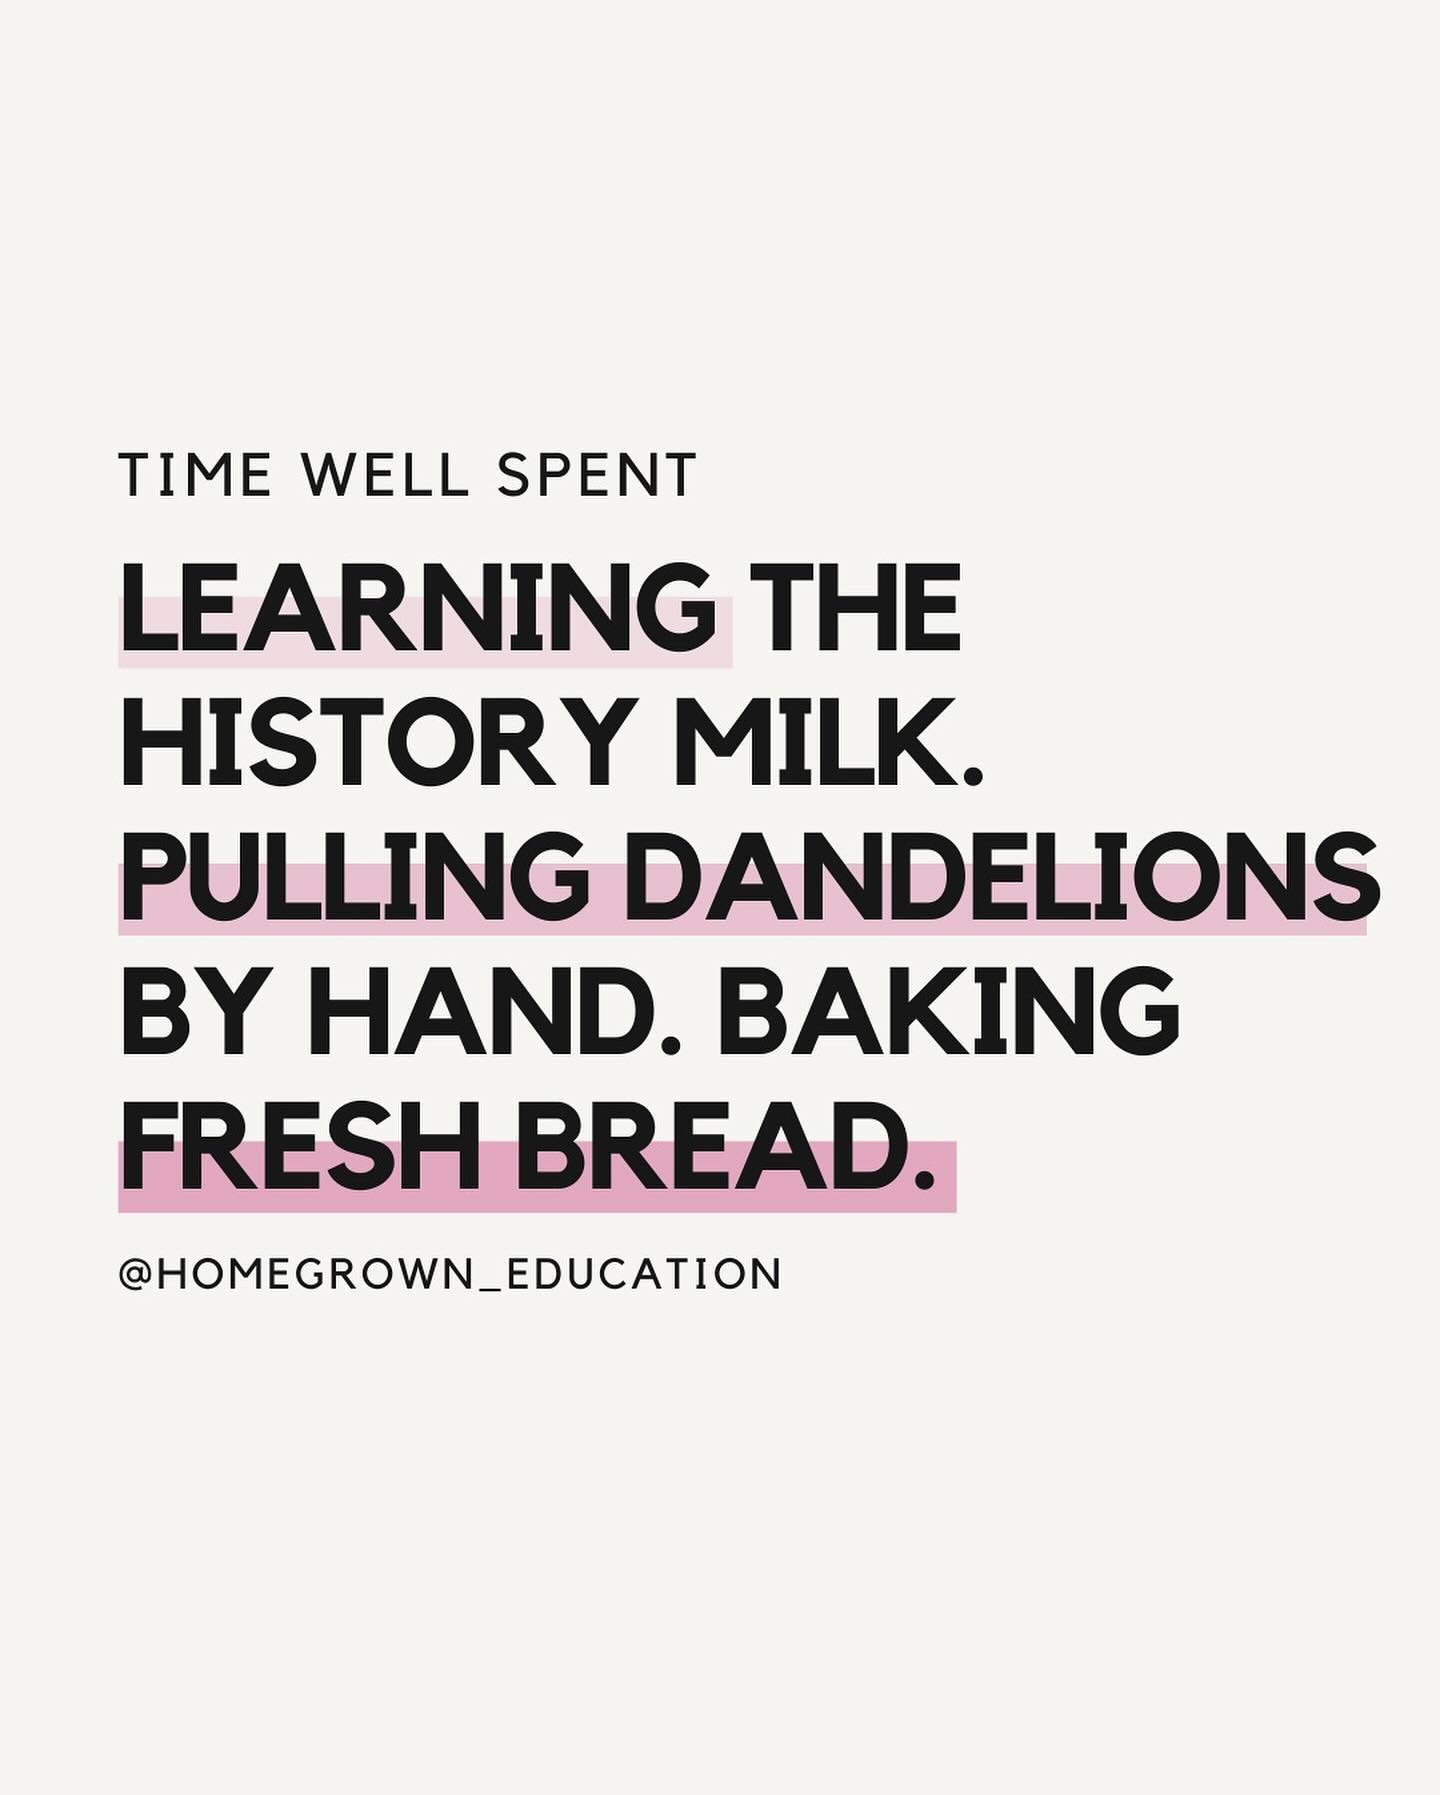 SWIPE 👉🏻 TO SEE $$$ WELL SPENT
I&rsquo;ve said it before, and I&rsquo;ll say it again&mdash;learning the history of MILK 🥛opens your eyes to the complexities of our food system and political institutions. This single food changed my entire perspec